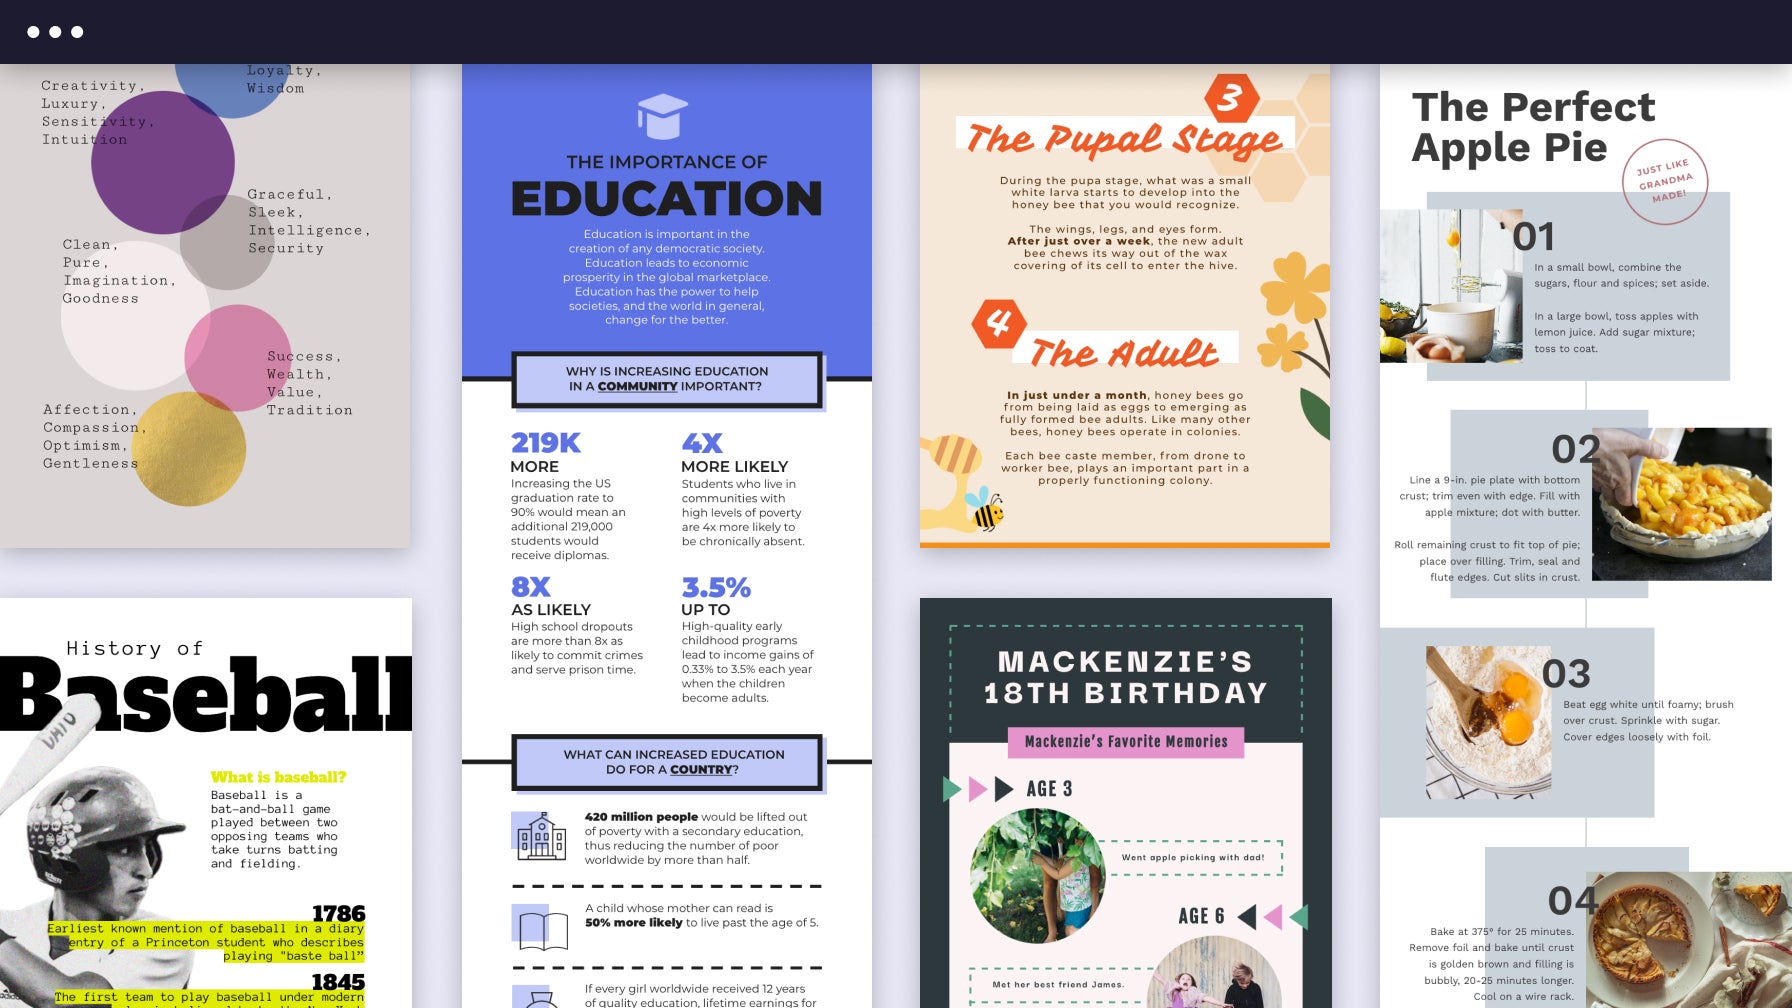 infographic maker free